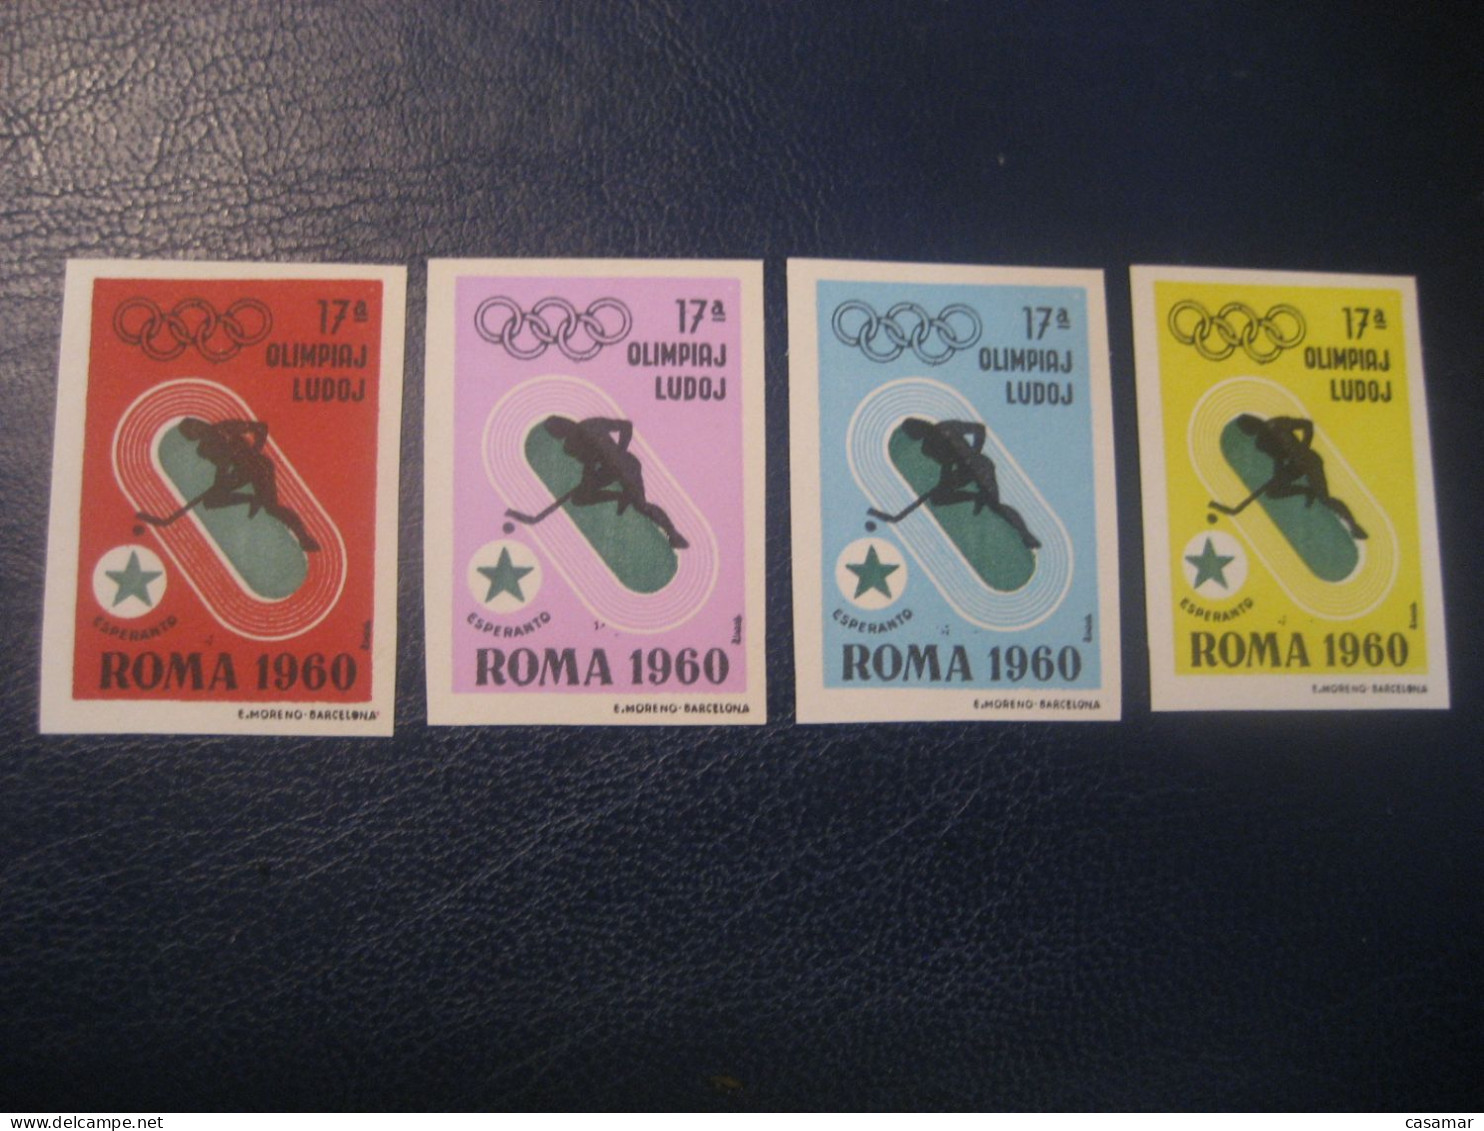 ROMA 1960 Ice Hockey Sur Glace Olympic Games Olympics Esperanto 4 Imperforated Poster Stamp Vignette ITALY Spain Label - Hockey (Ice)